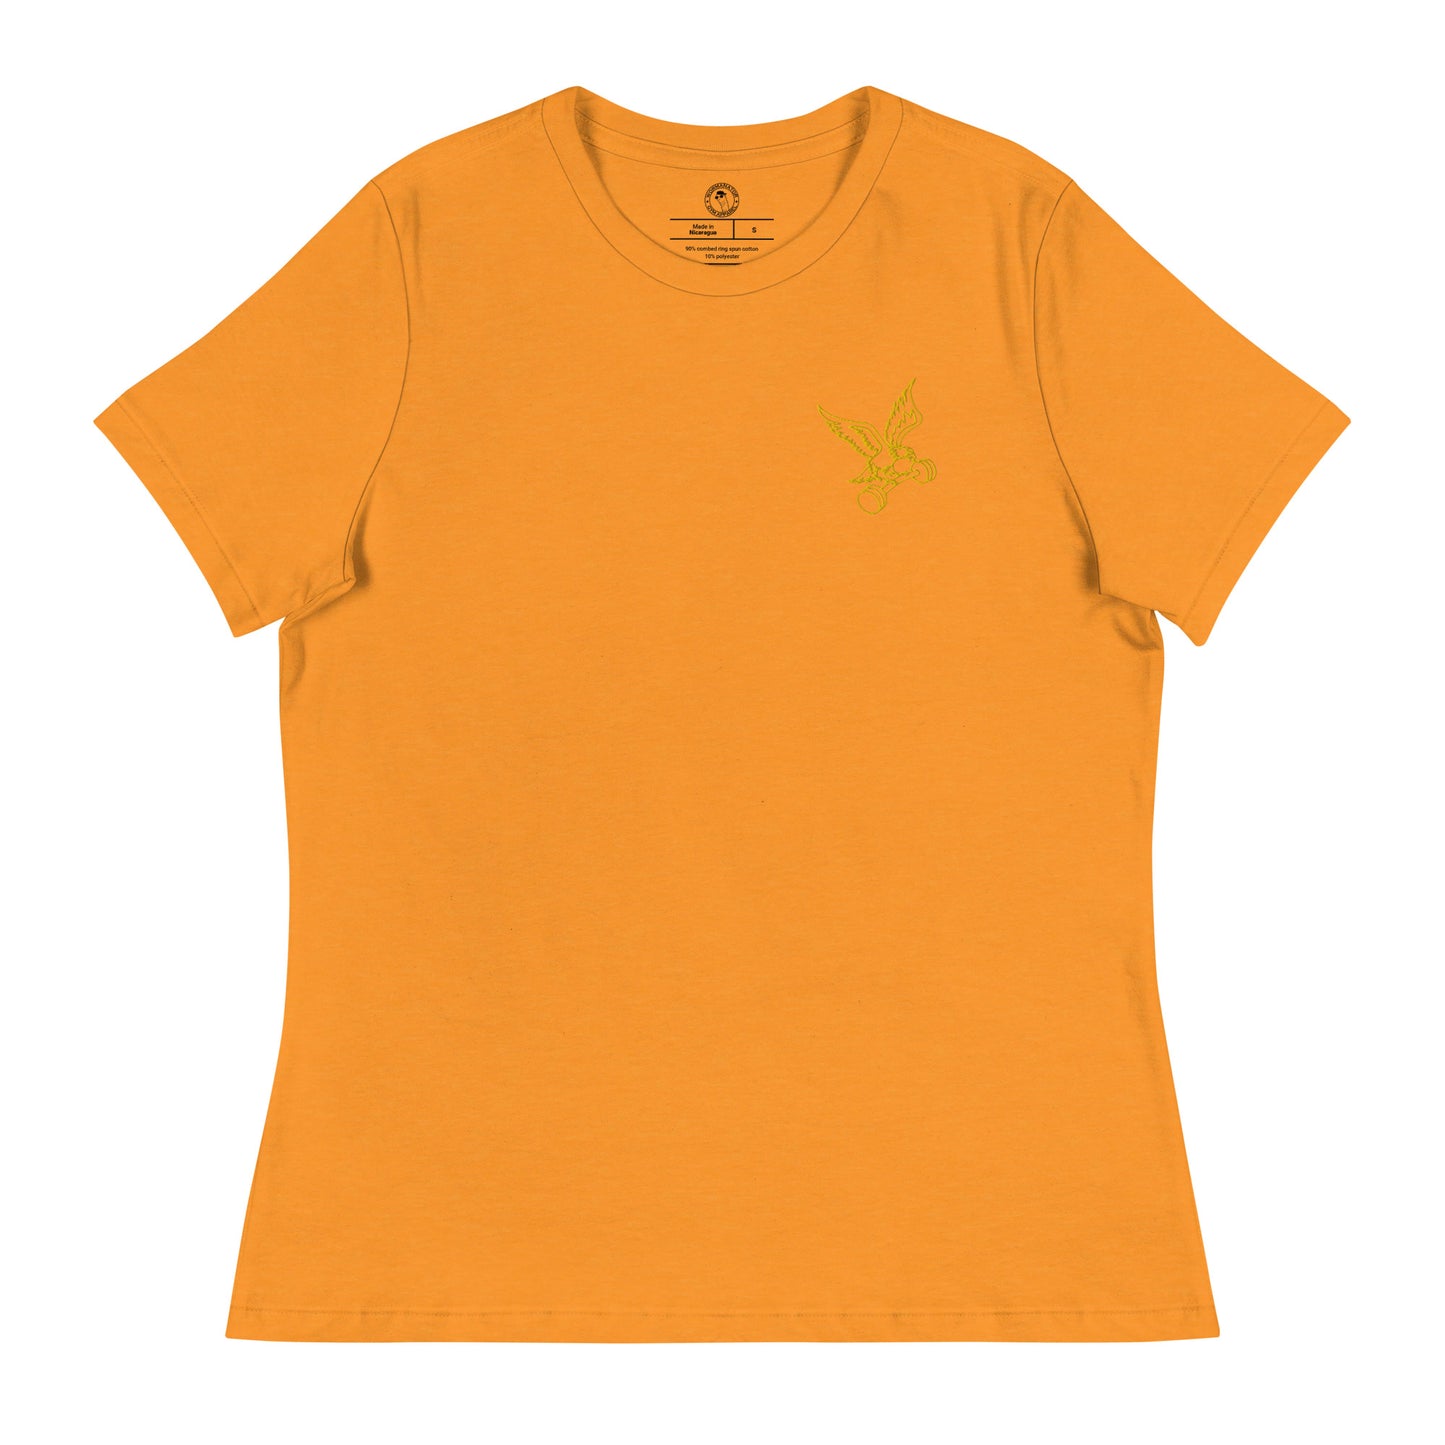 Women's Embroidered Barbell Eagle Shirt in Heather Marmalade